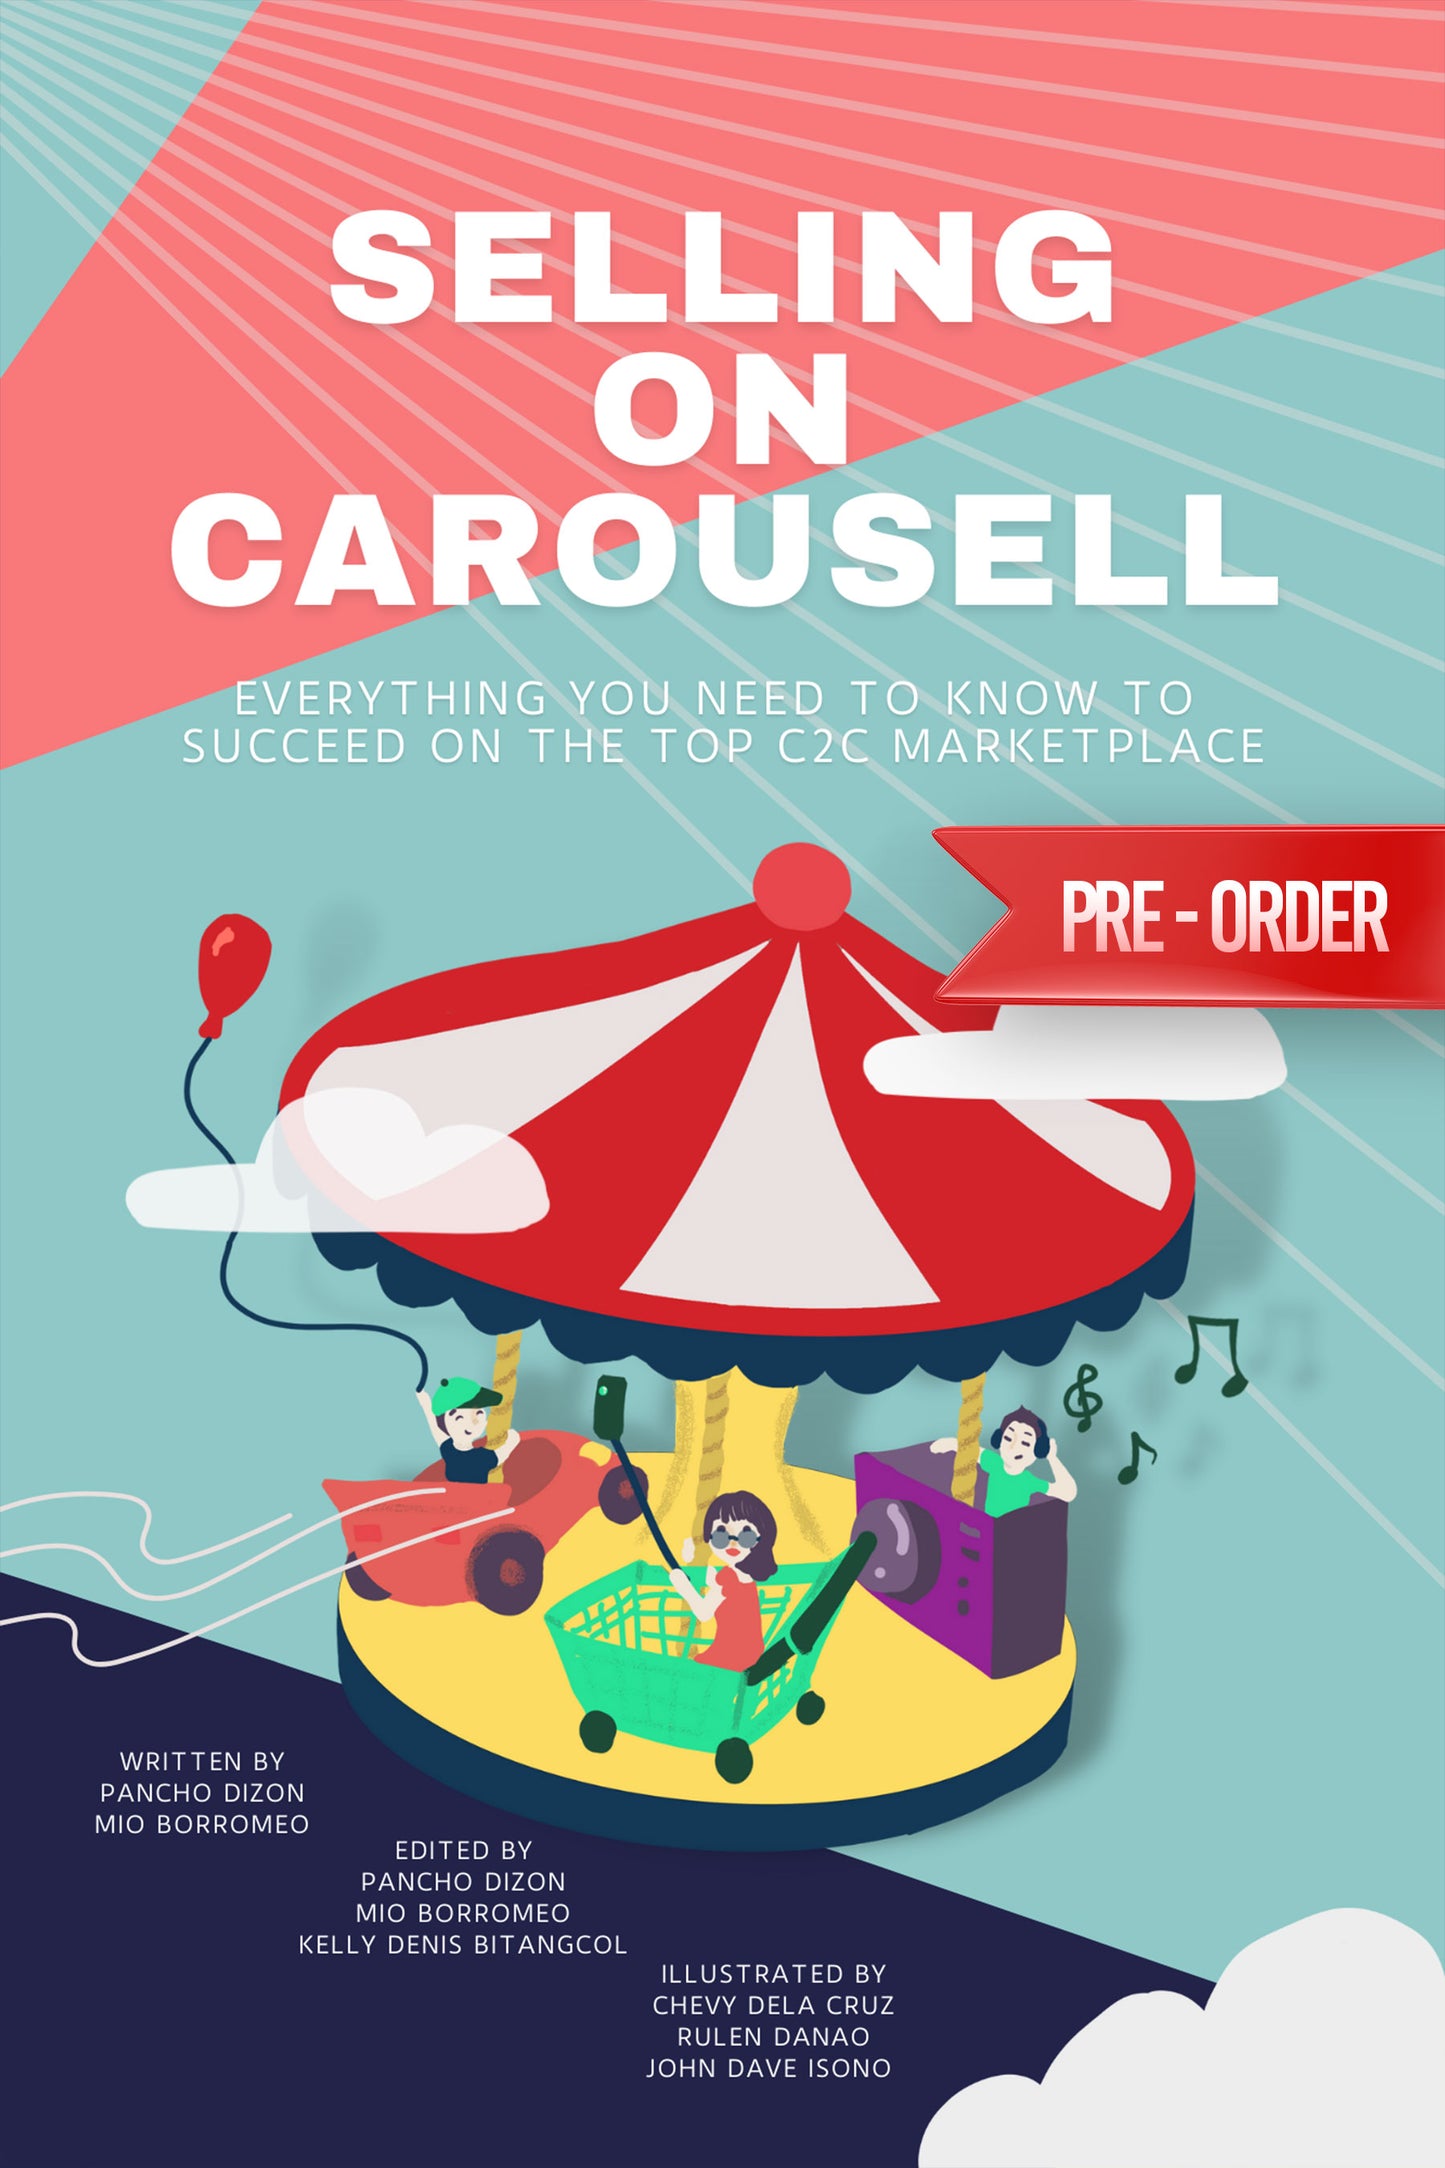 Selling on Carousell: Everything You Need to Know about C2C Marketplace (Pre-Order)